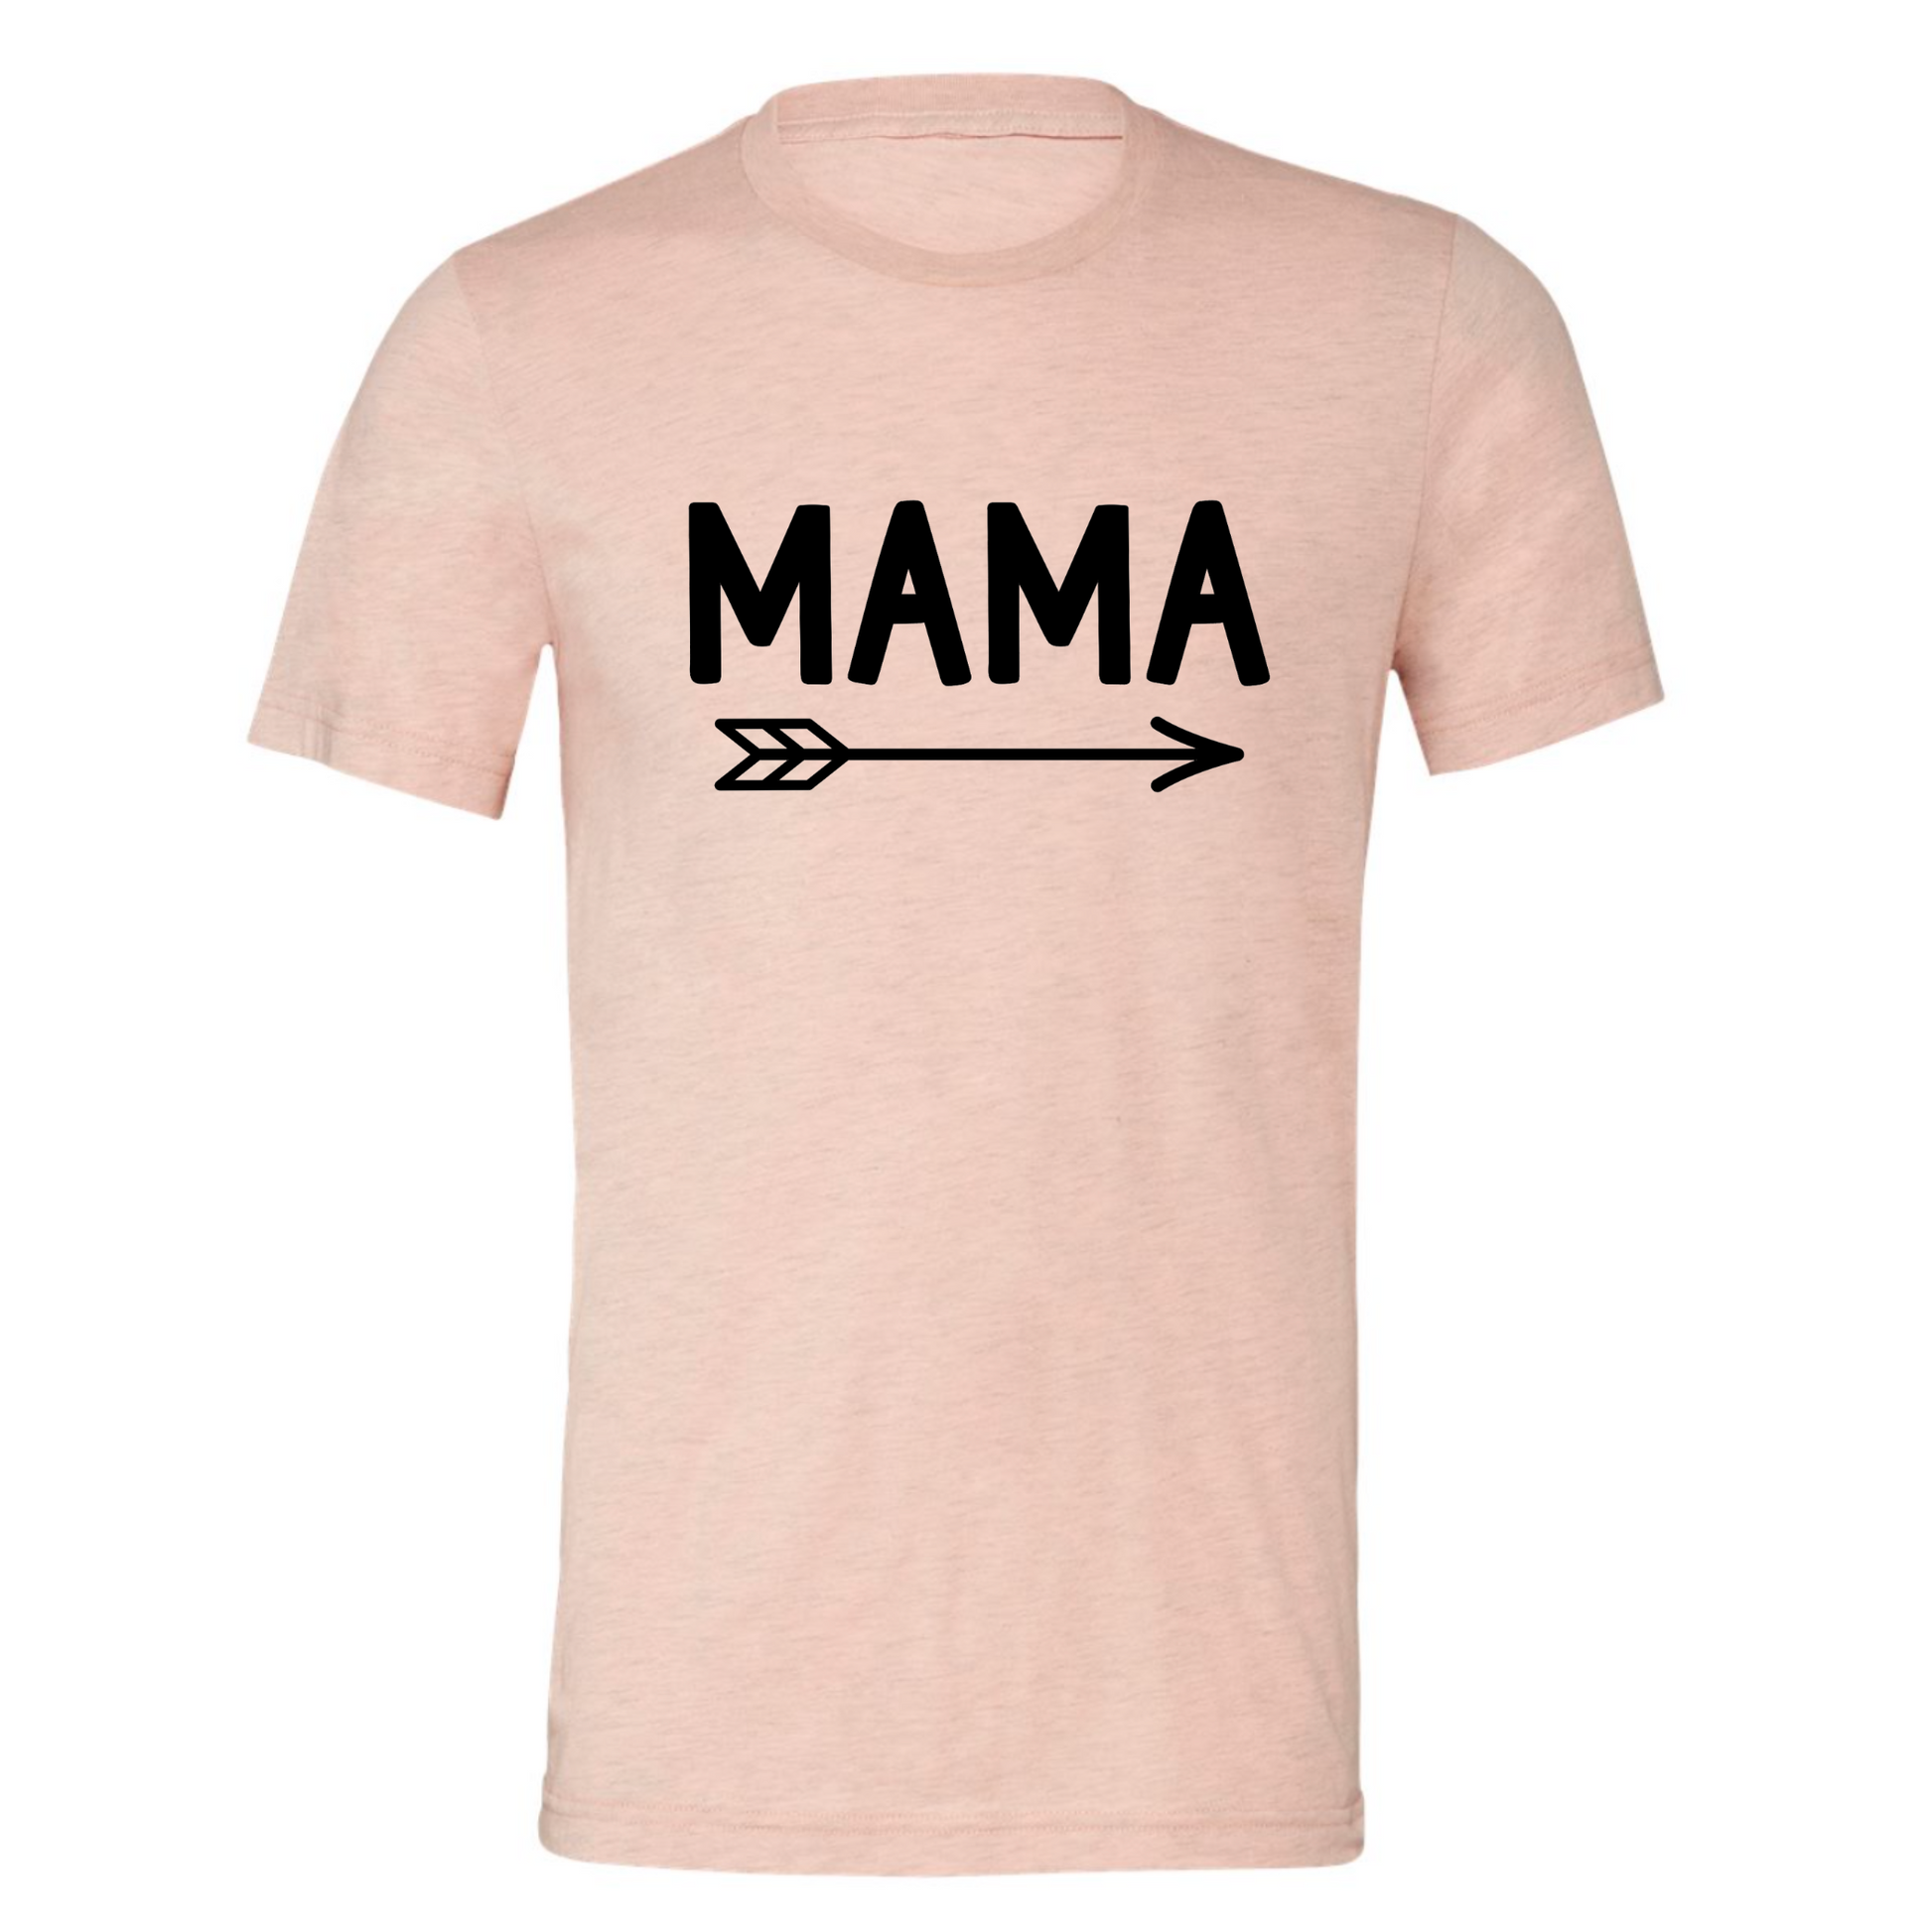 Mama - T-Shirt in heather prism peach. Mama is in a black design with an arrow below it pointing to the right. This is the front view of the t-shirt.